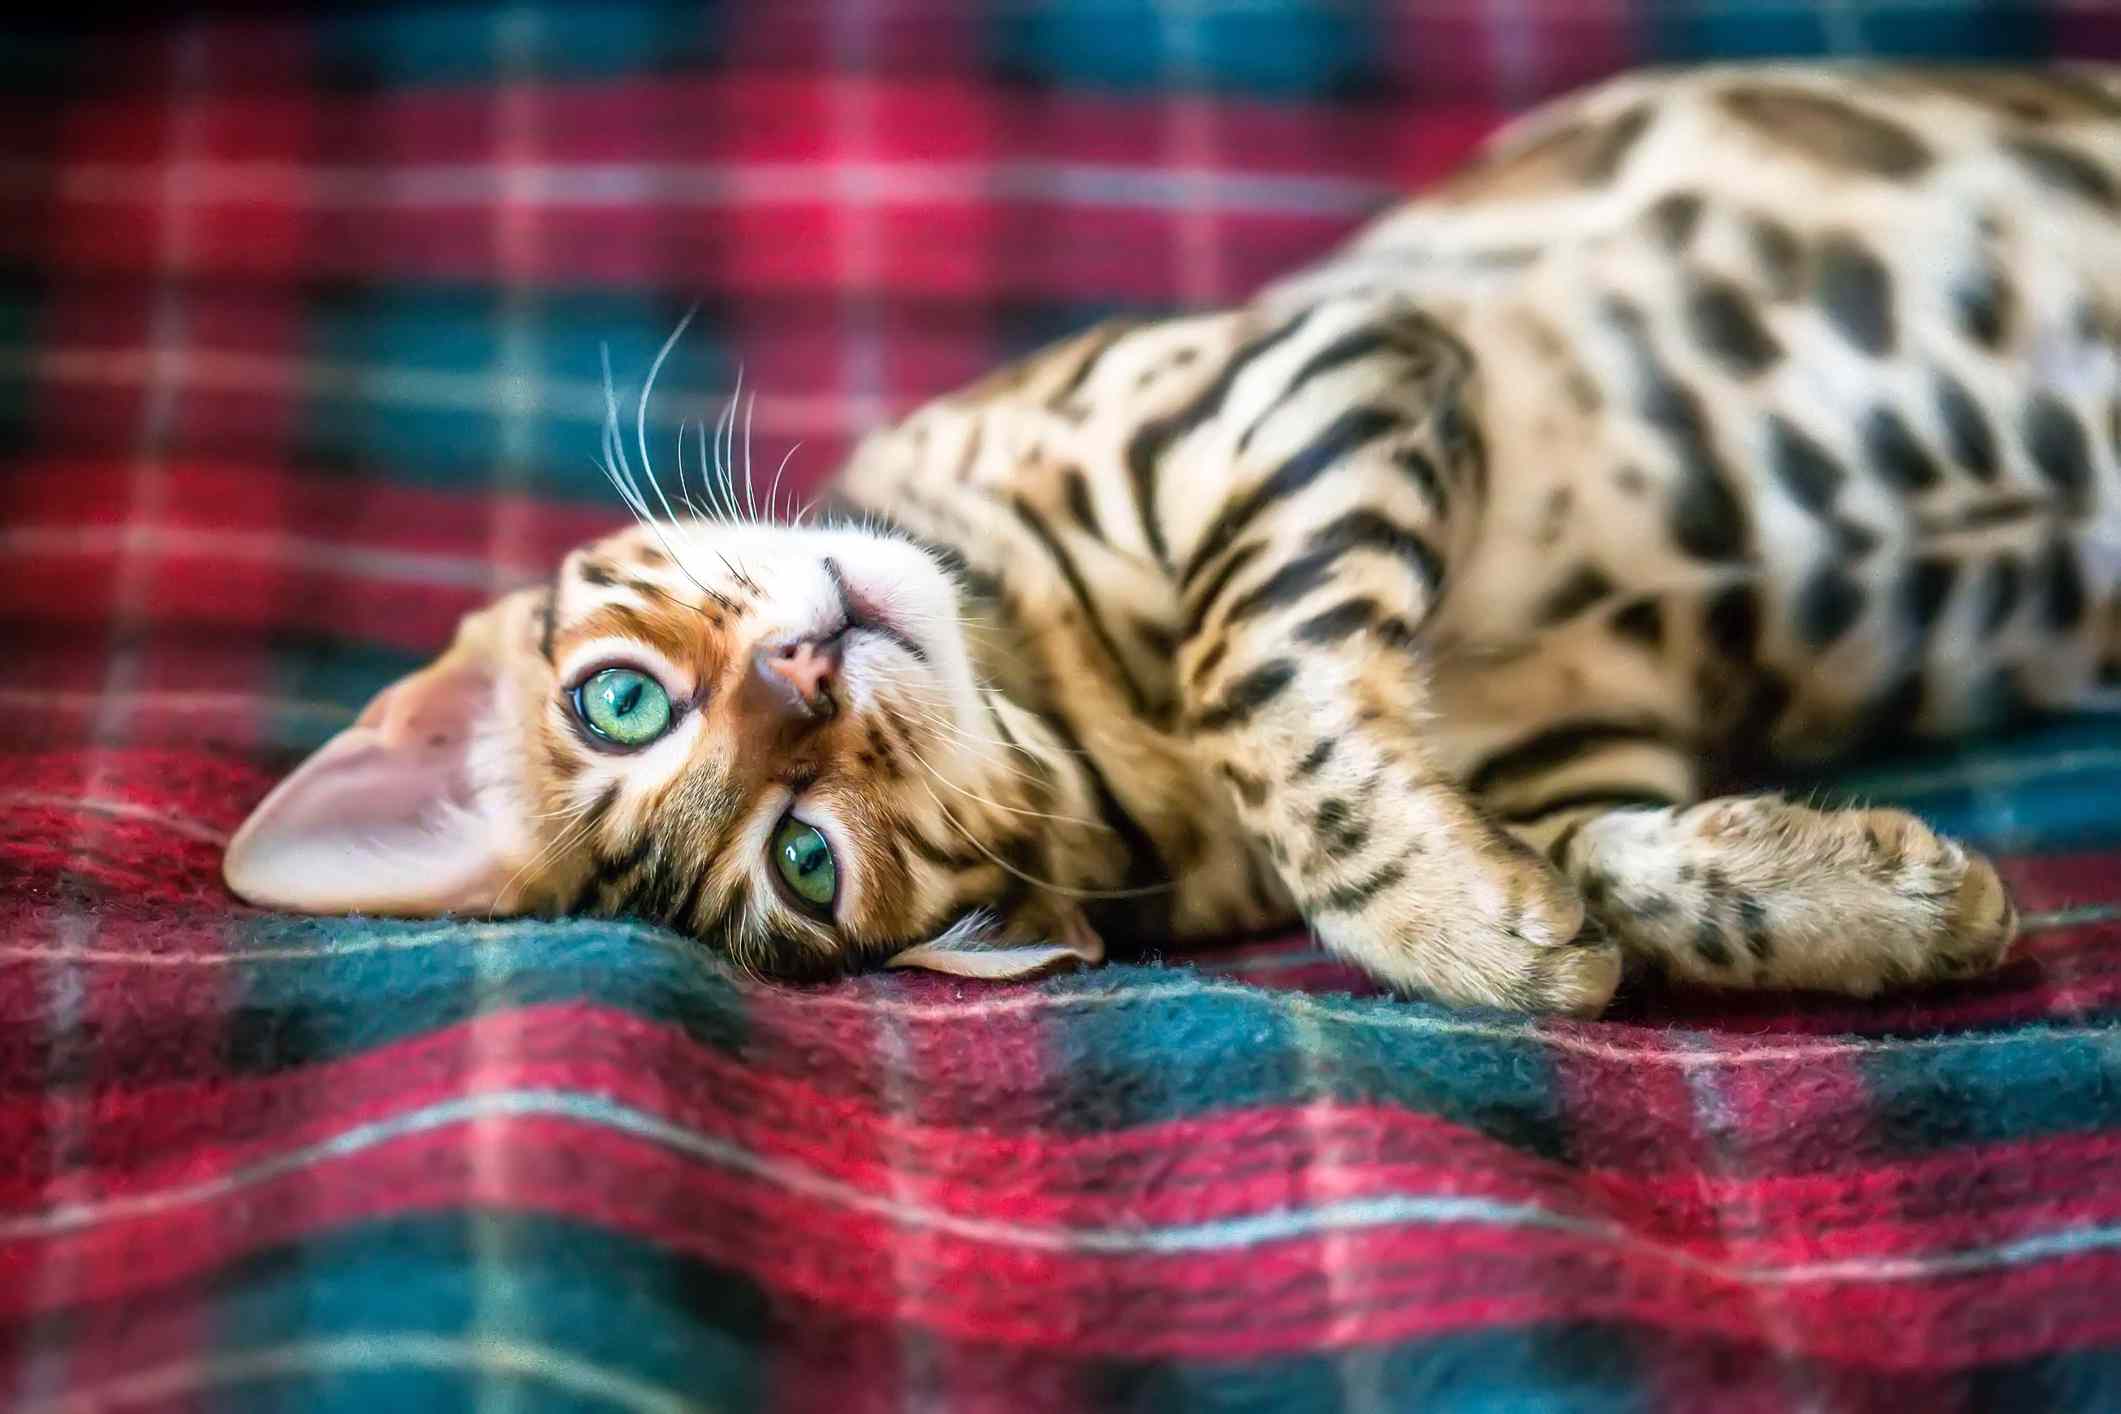 A Bengal cat lounging on a bed.